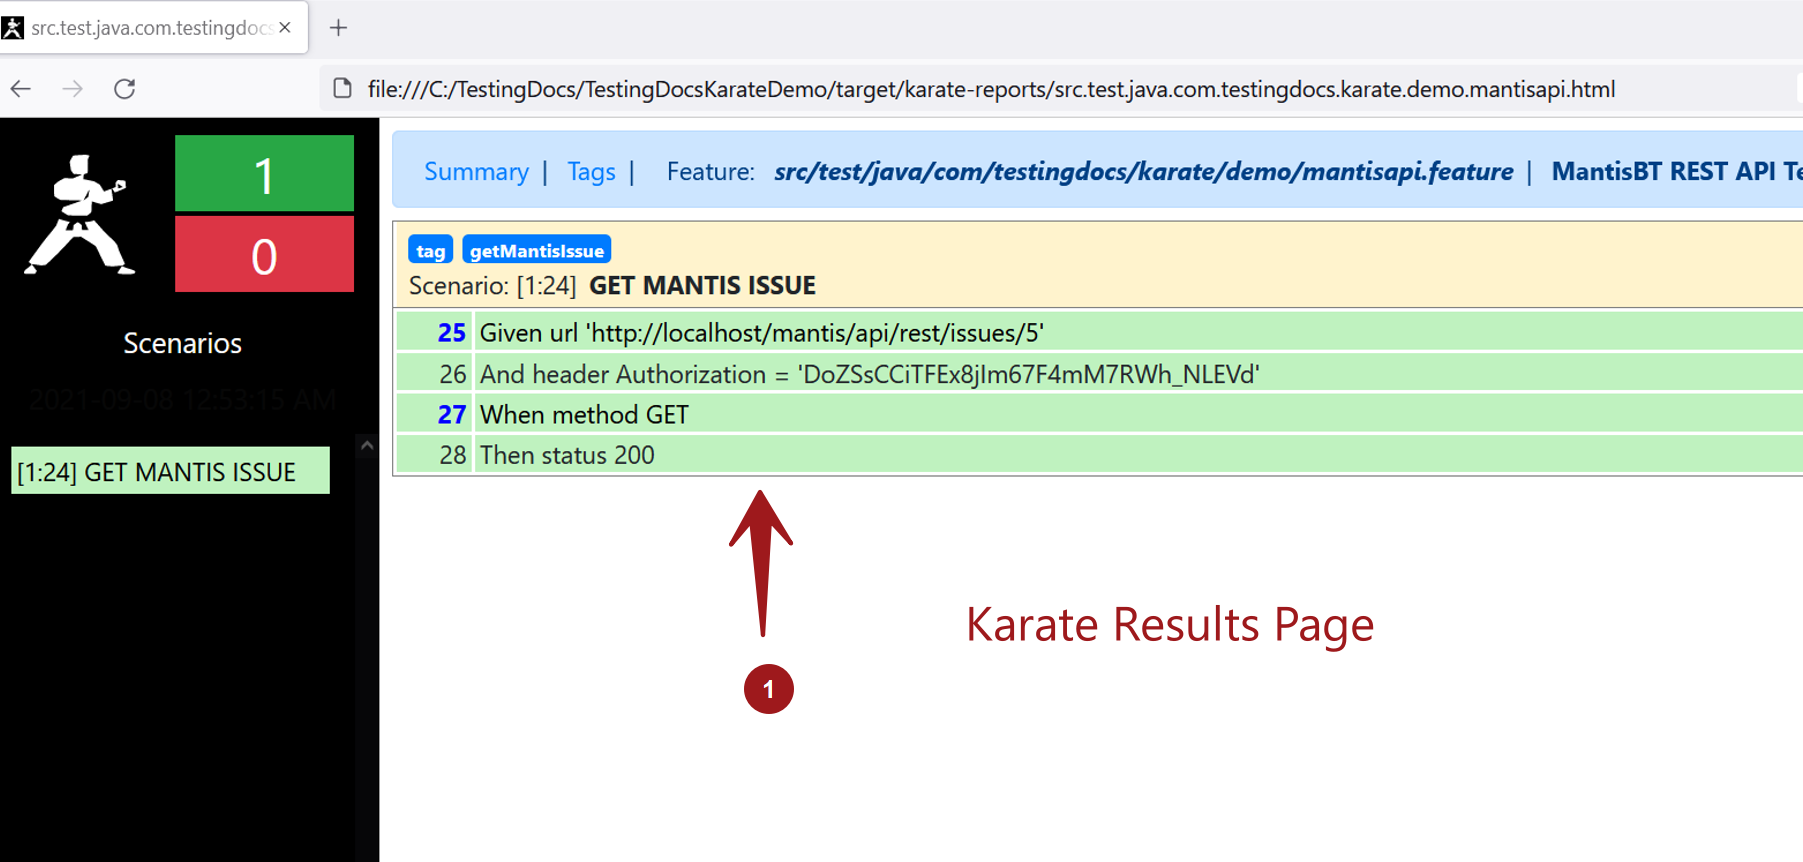 Karate Results Page